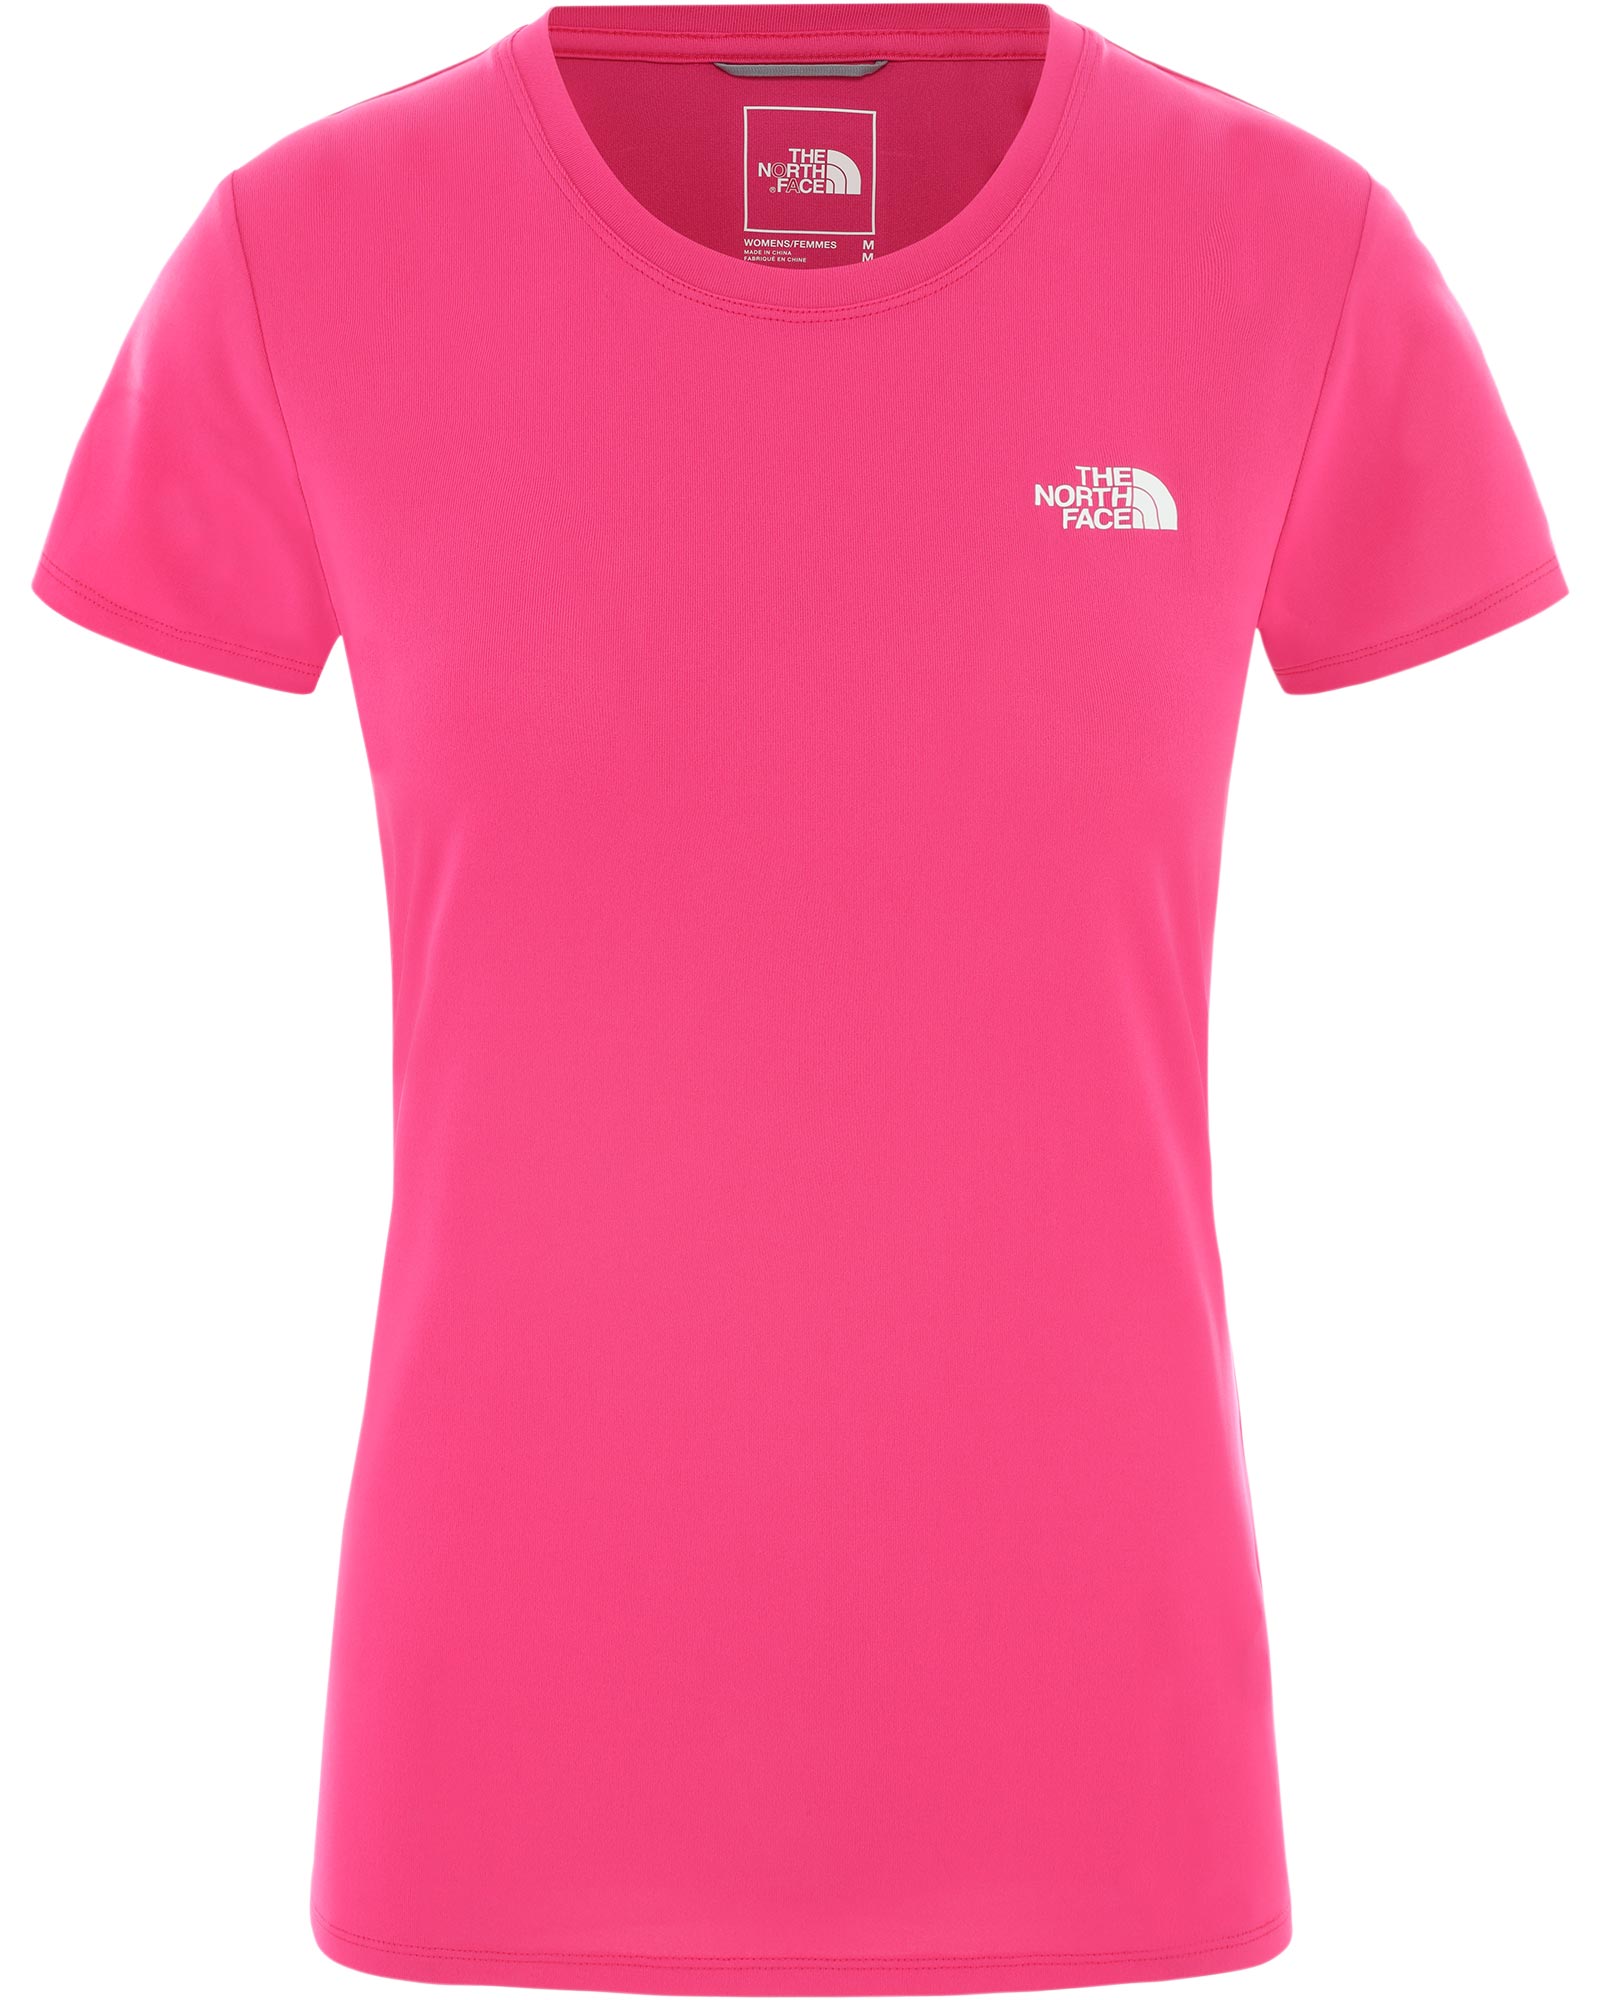 The North Face Reaxion Amp Women’s Crew T Shirt - Mr Pink XS